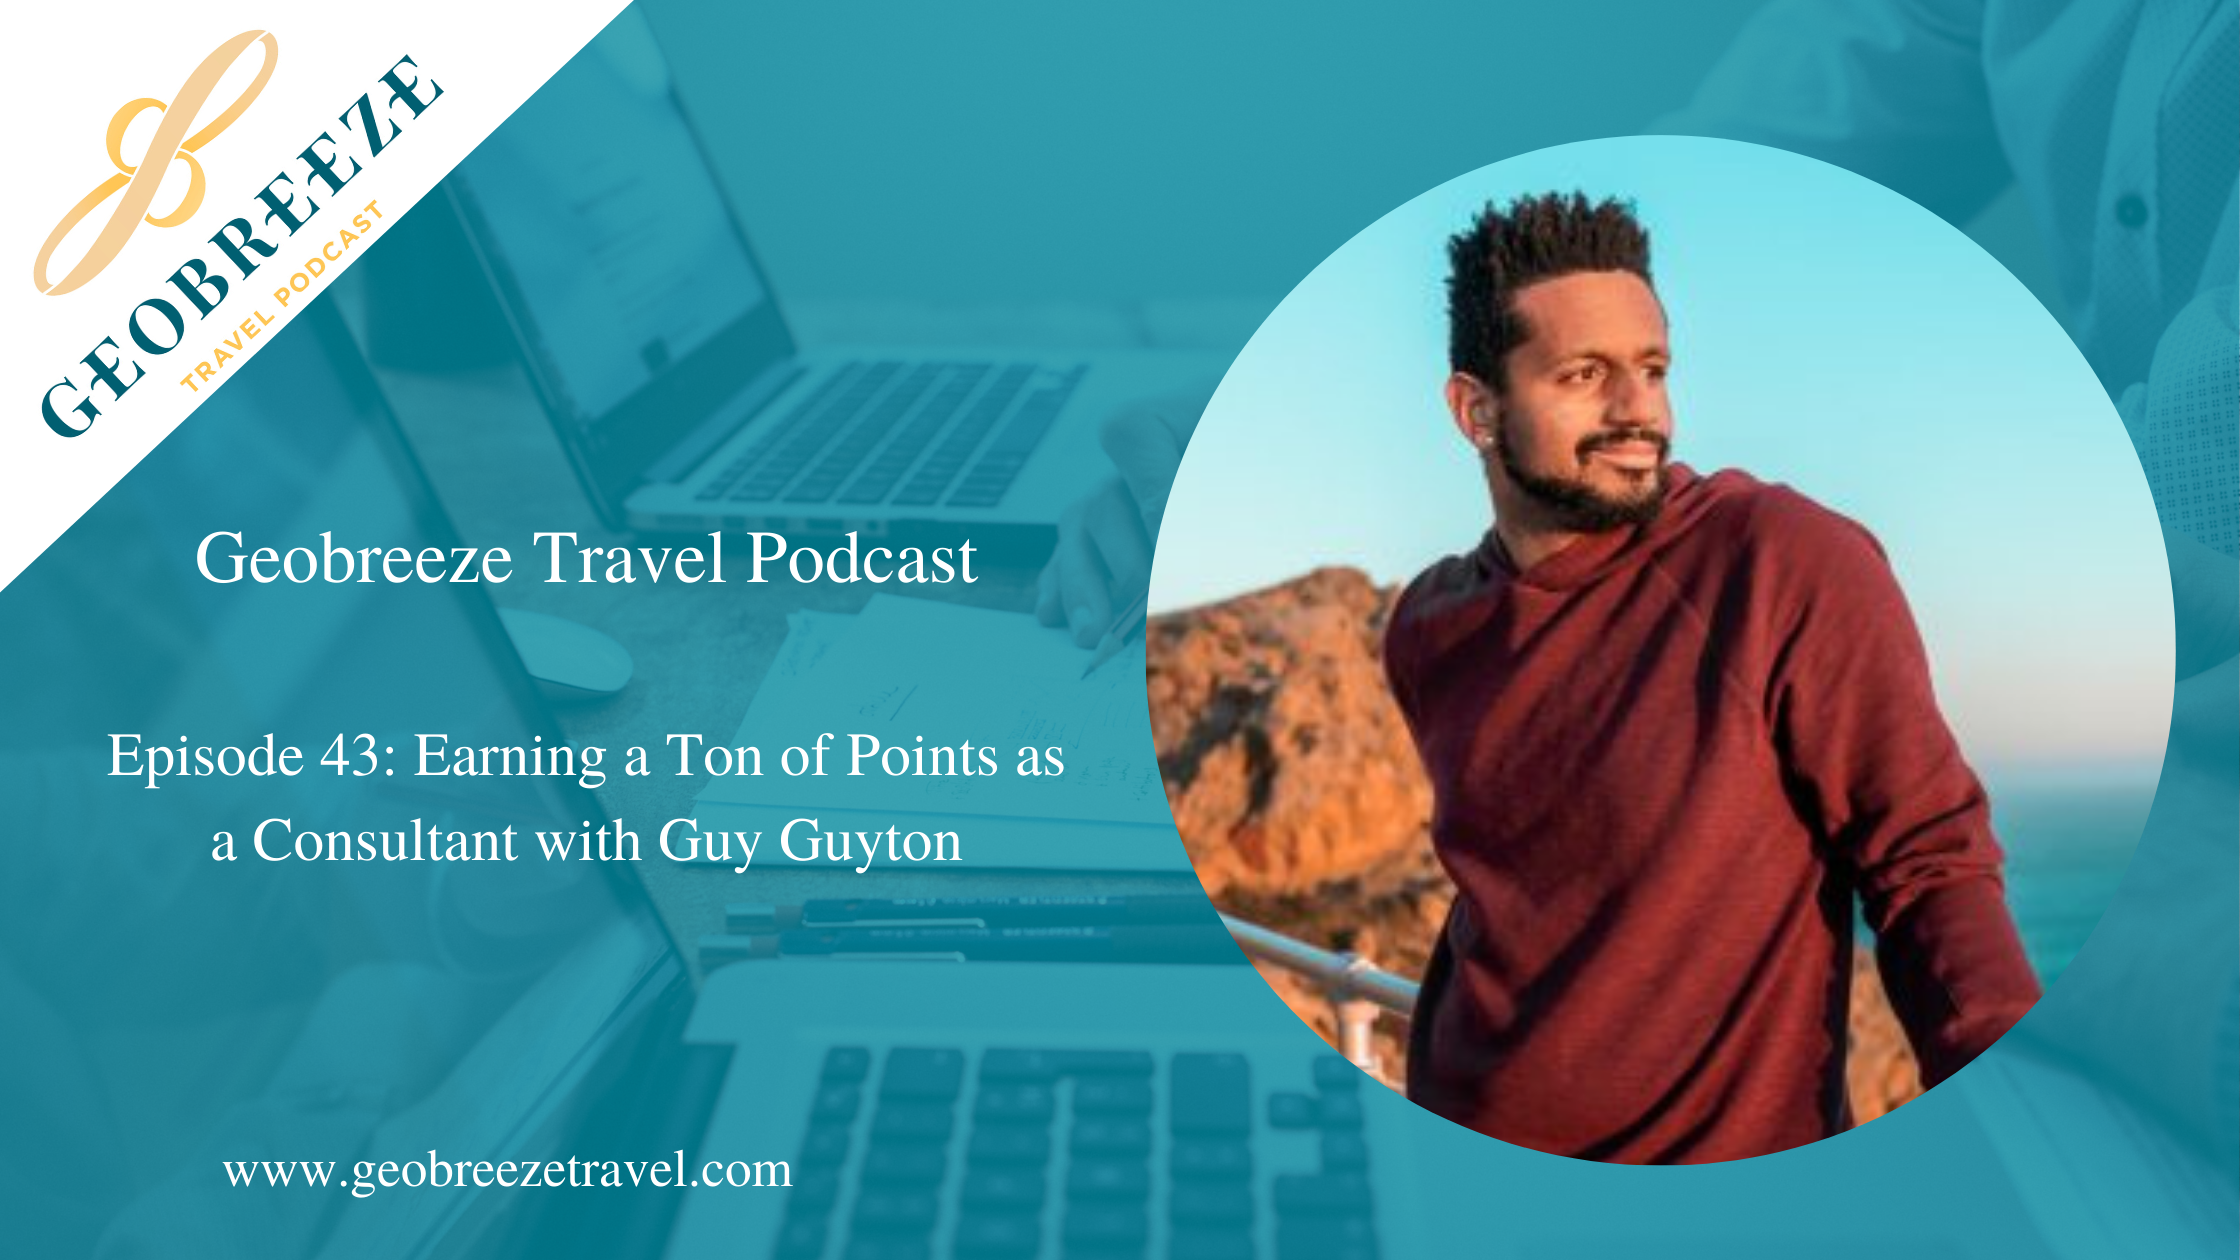 Episode 43: Earning a Ton of Points as a Consultant with Guy Guyton